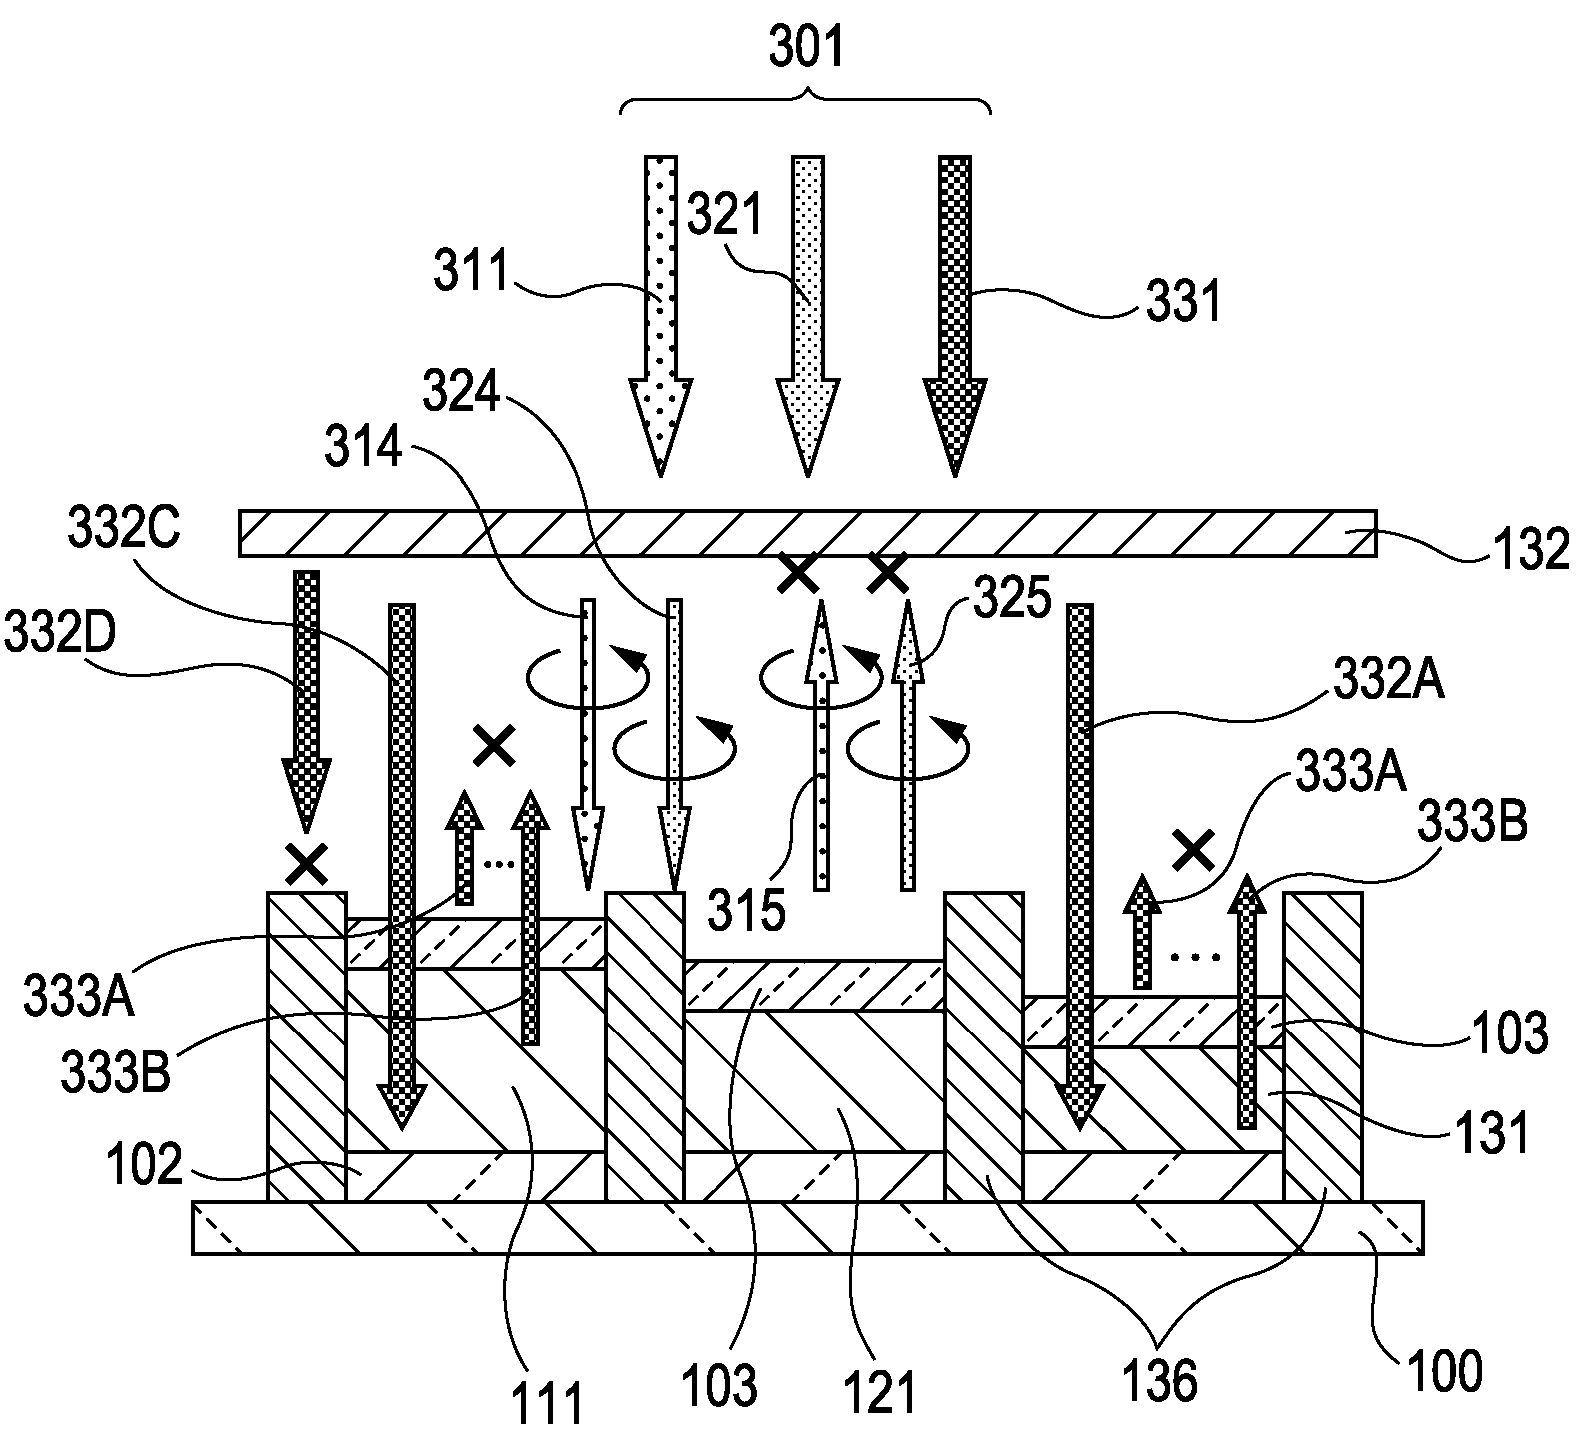 Display apparatus with circularly polarizing member and a resonator assembly for attenuating external light